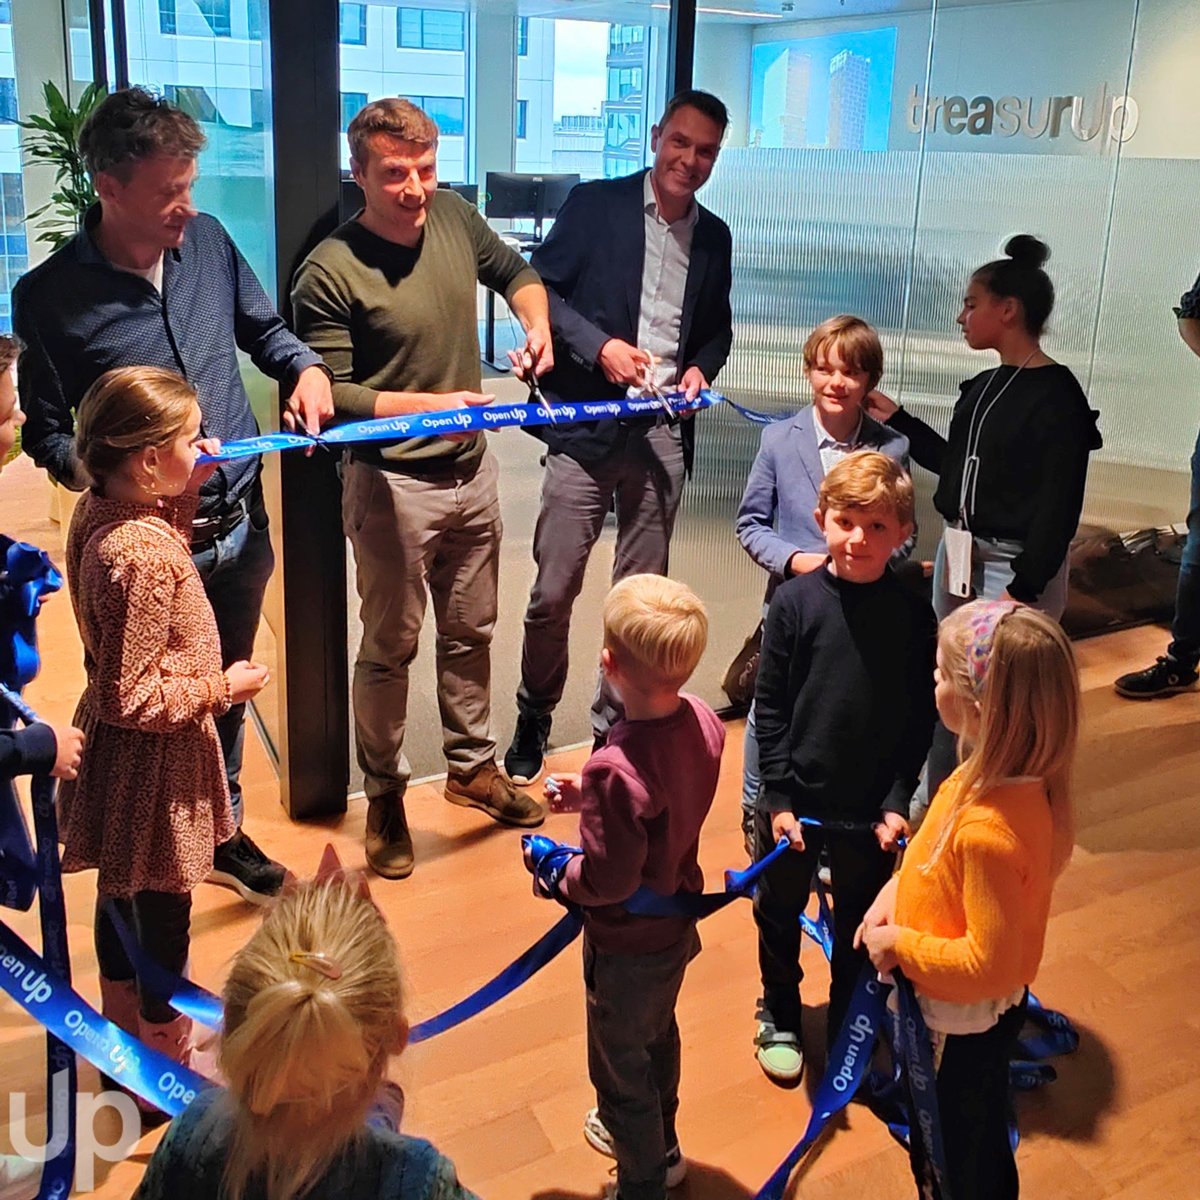 TreasurUp-cutting-the-ribbon-in-the-new-office-in-Utrecht